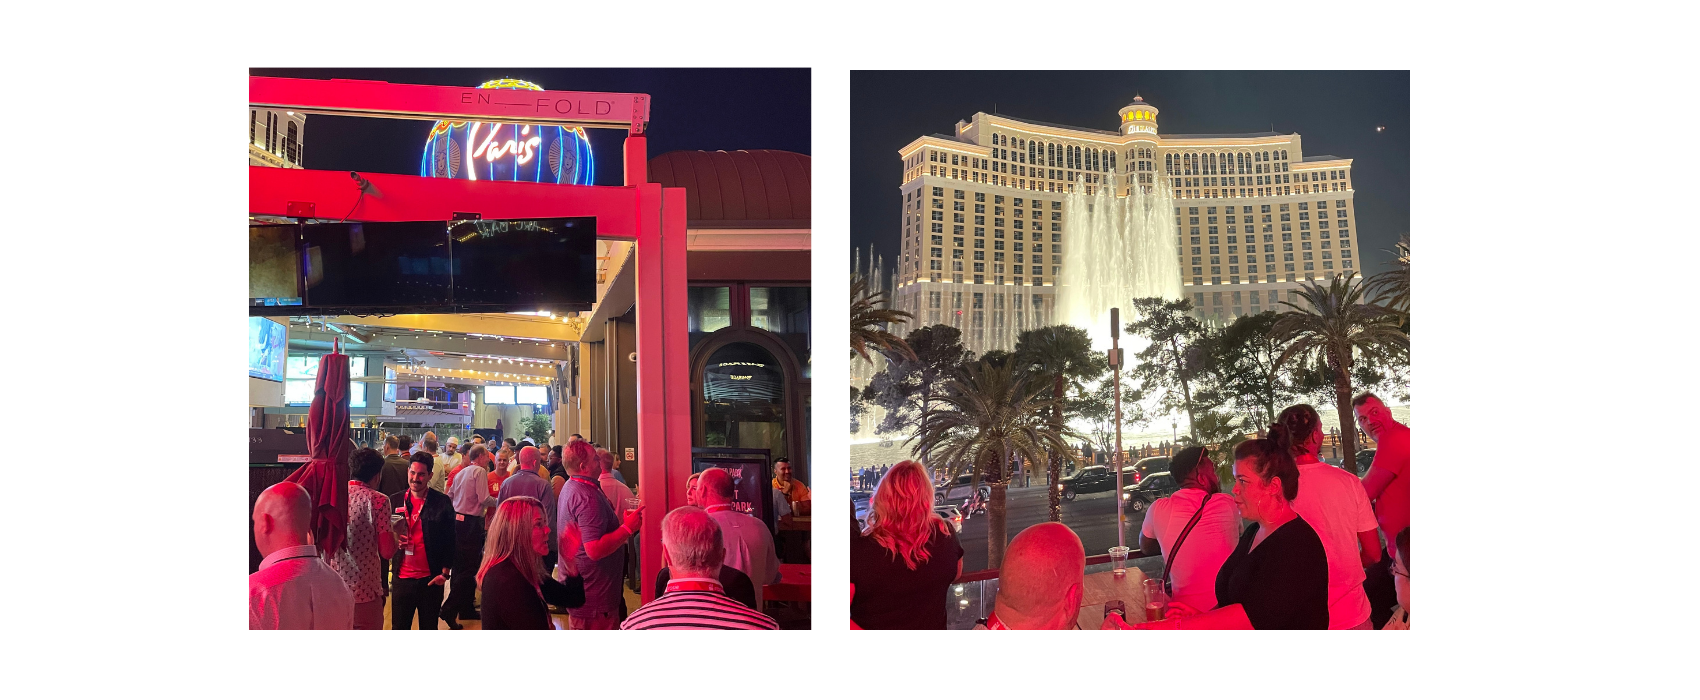 Two images showing scenes from the Rosie rooftop "Hoppy Hour" at Beer Park in Las Vegas across from the Bellagio Fountains